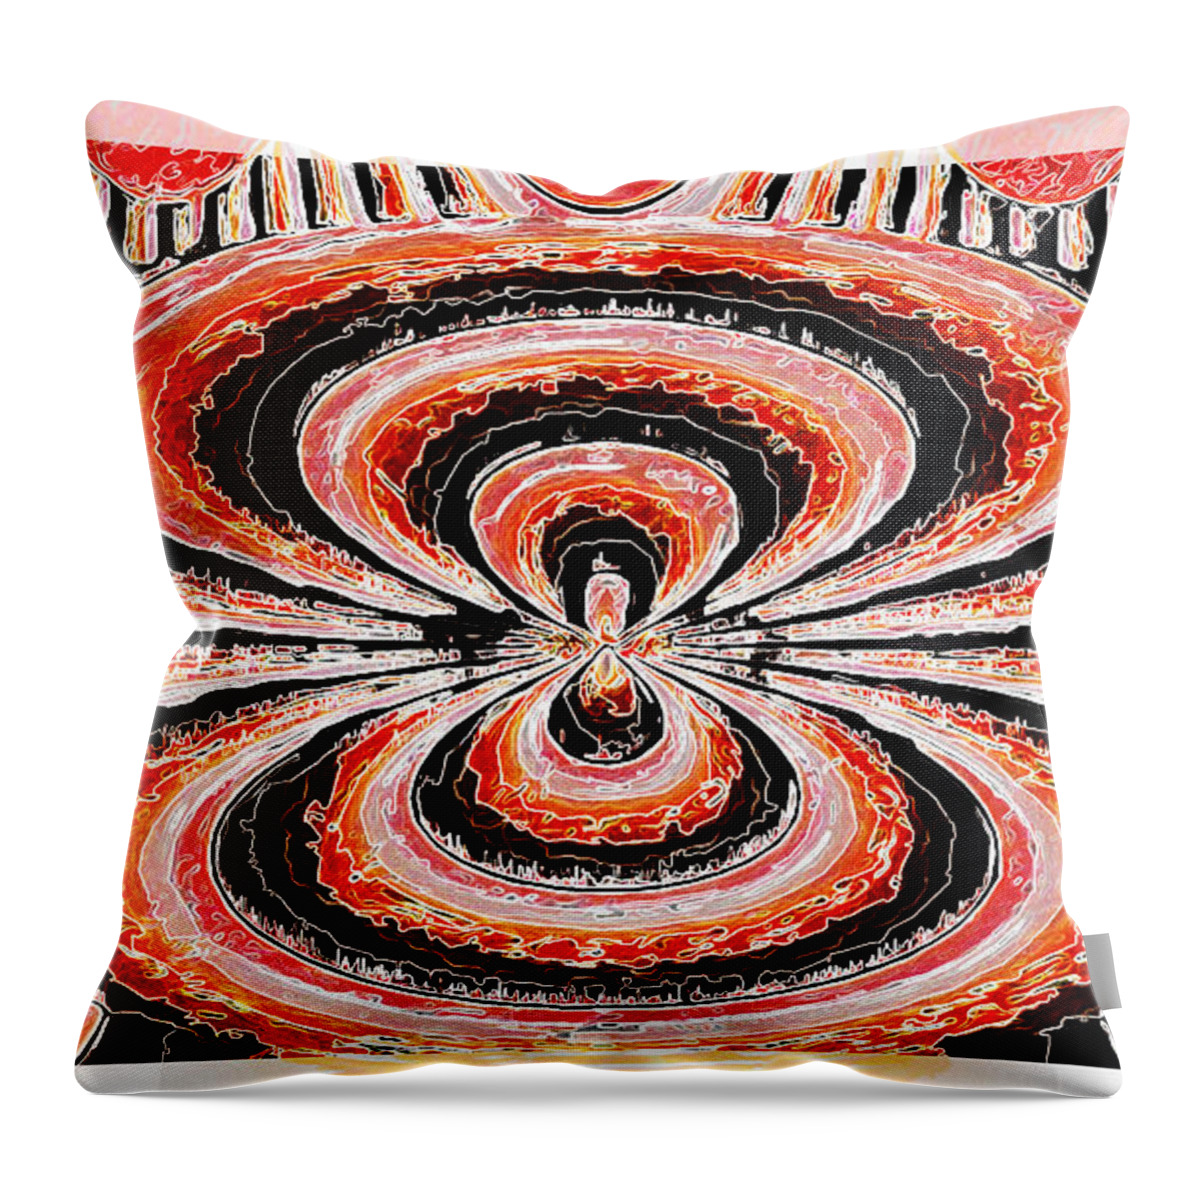 Waves Throw Pillow featuring the digital art Waves by Paula Ayers